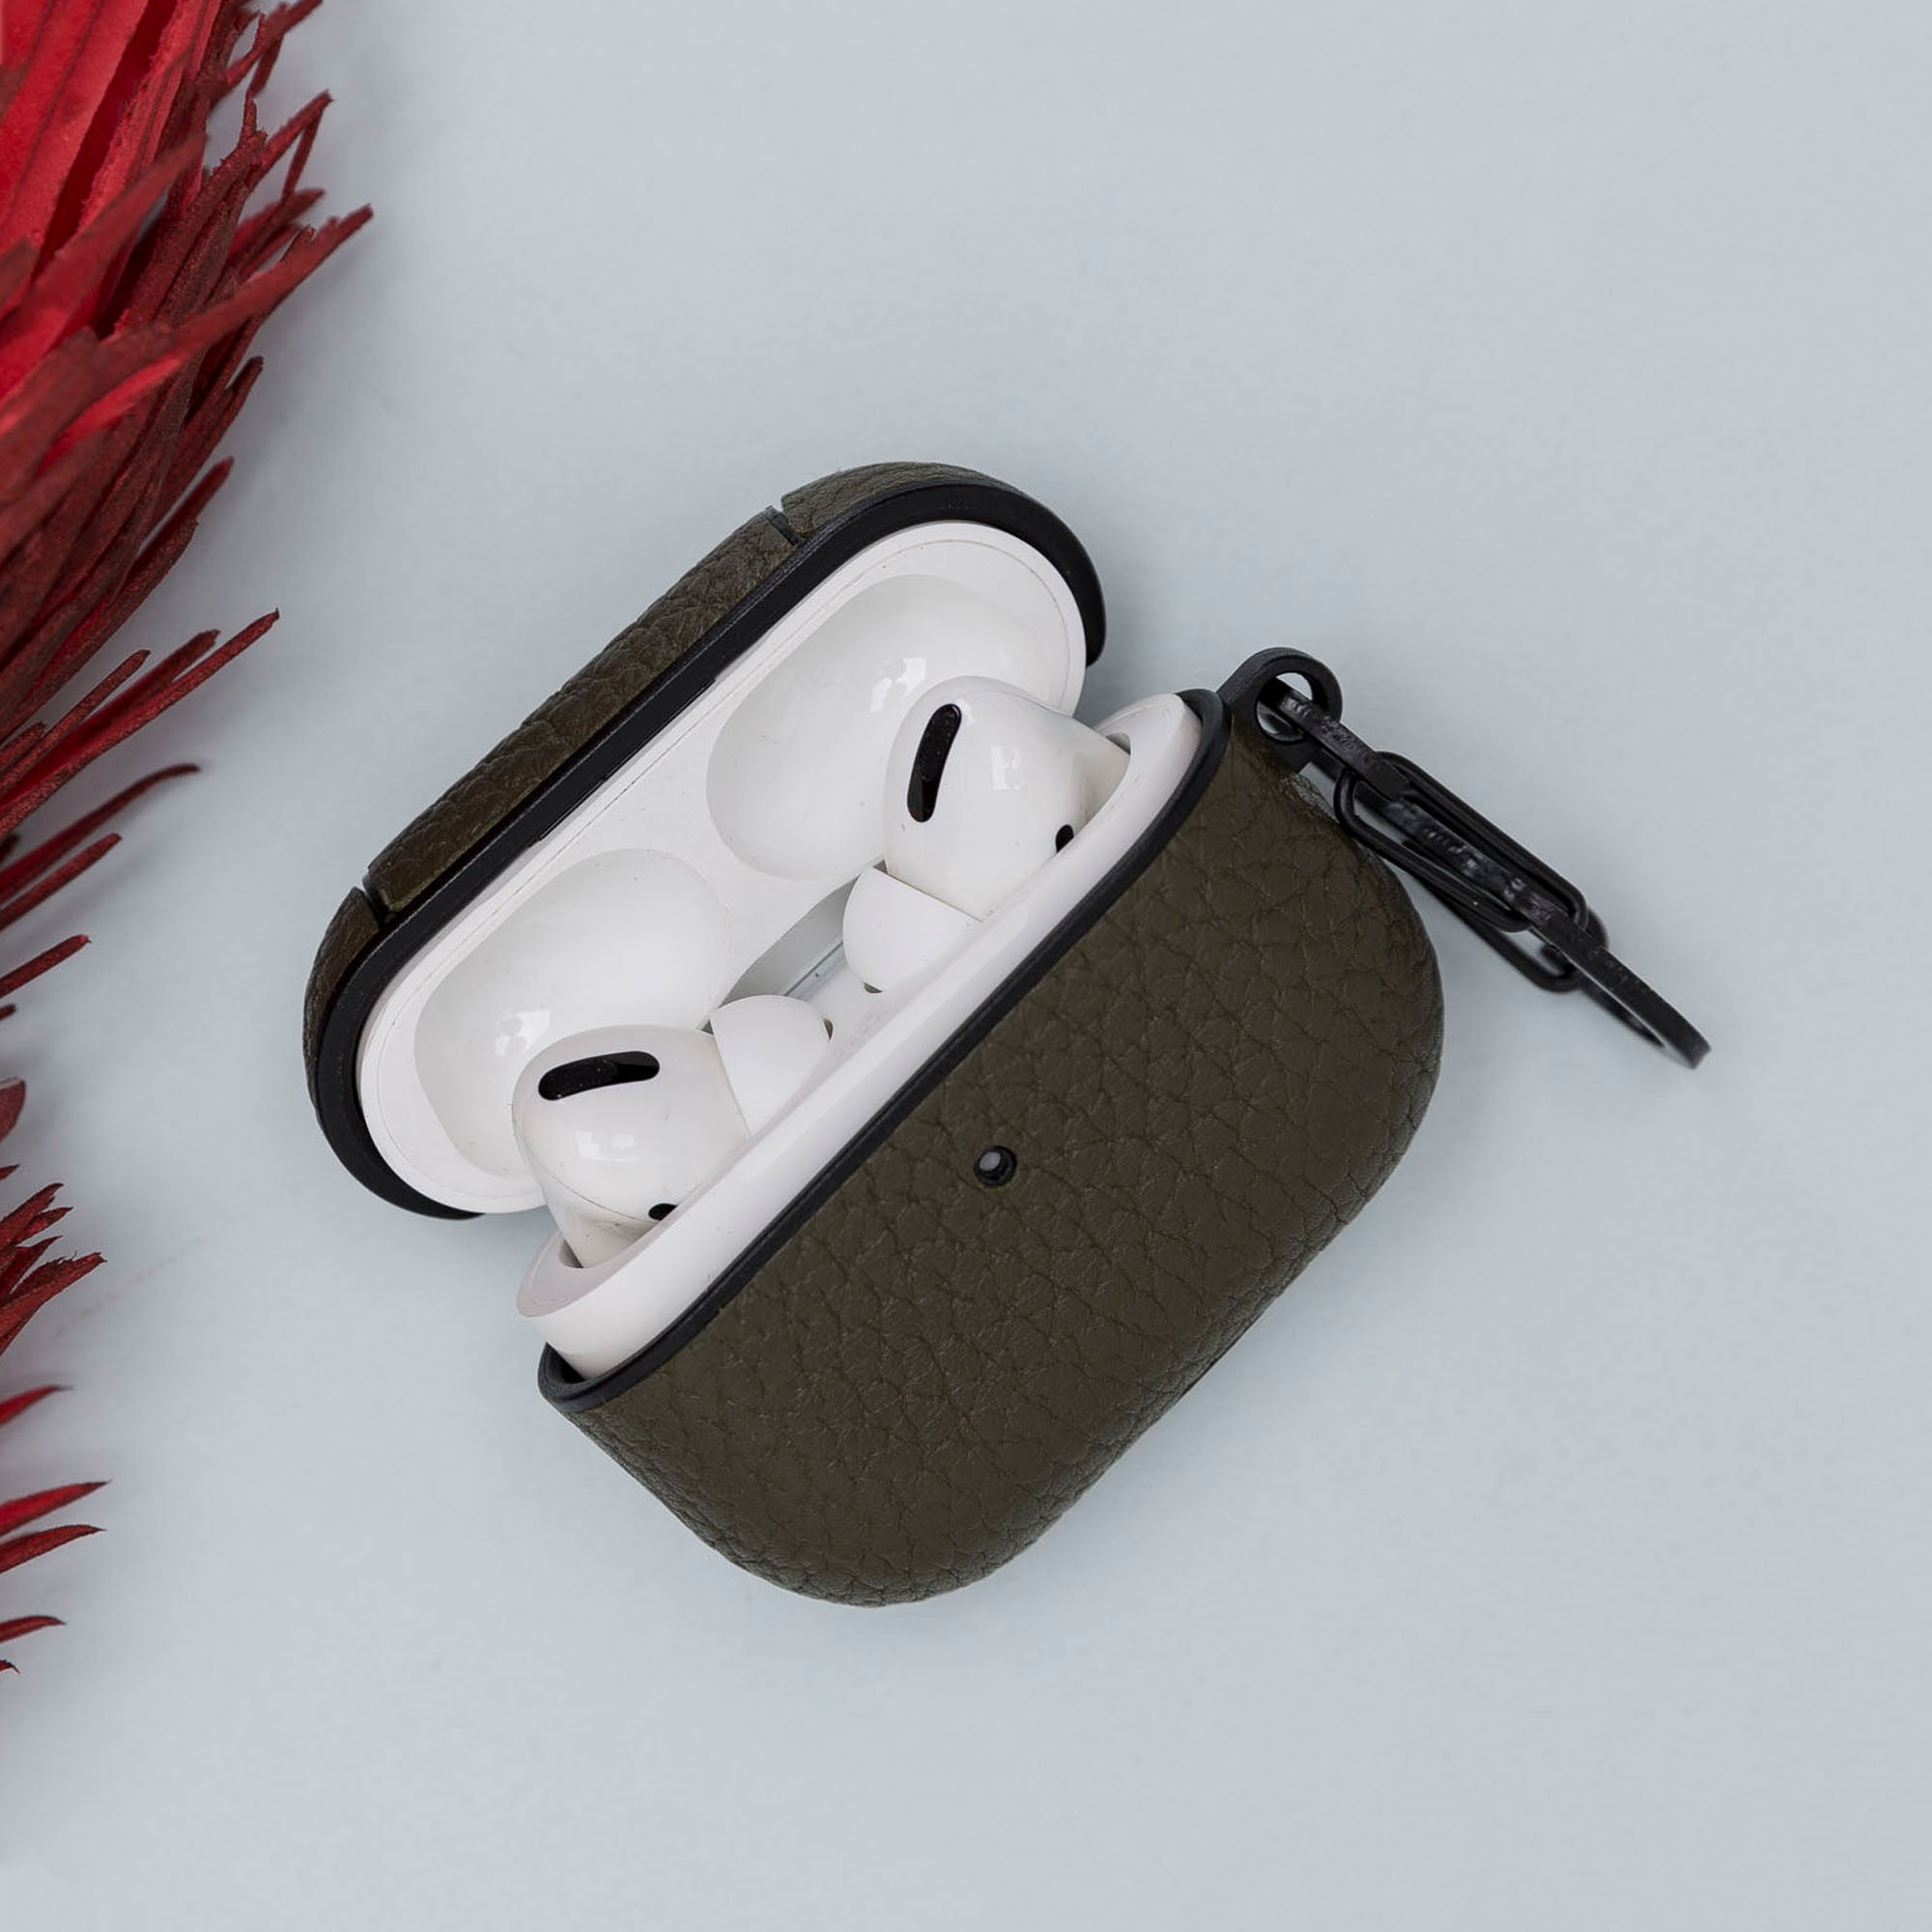 Juni Leather Capsule Case for AirPods Pro - GREEN - saracleather